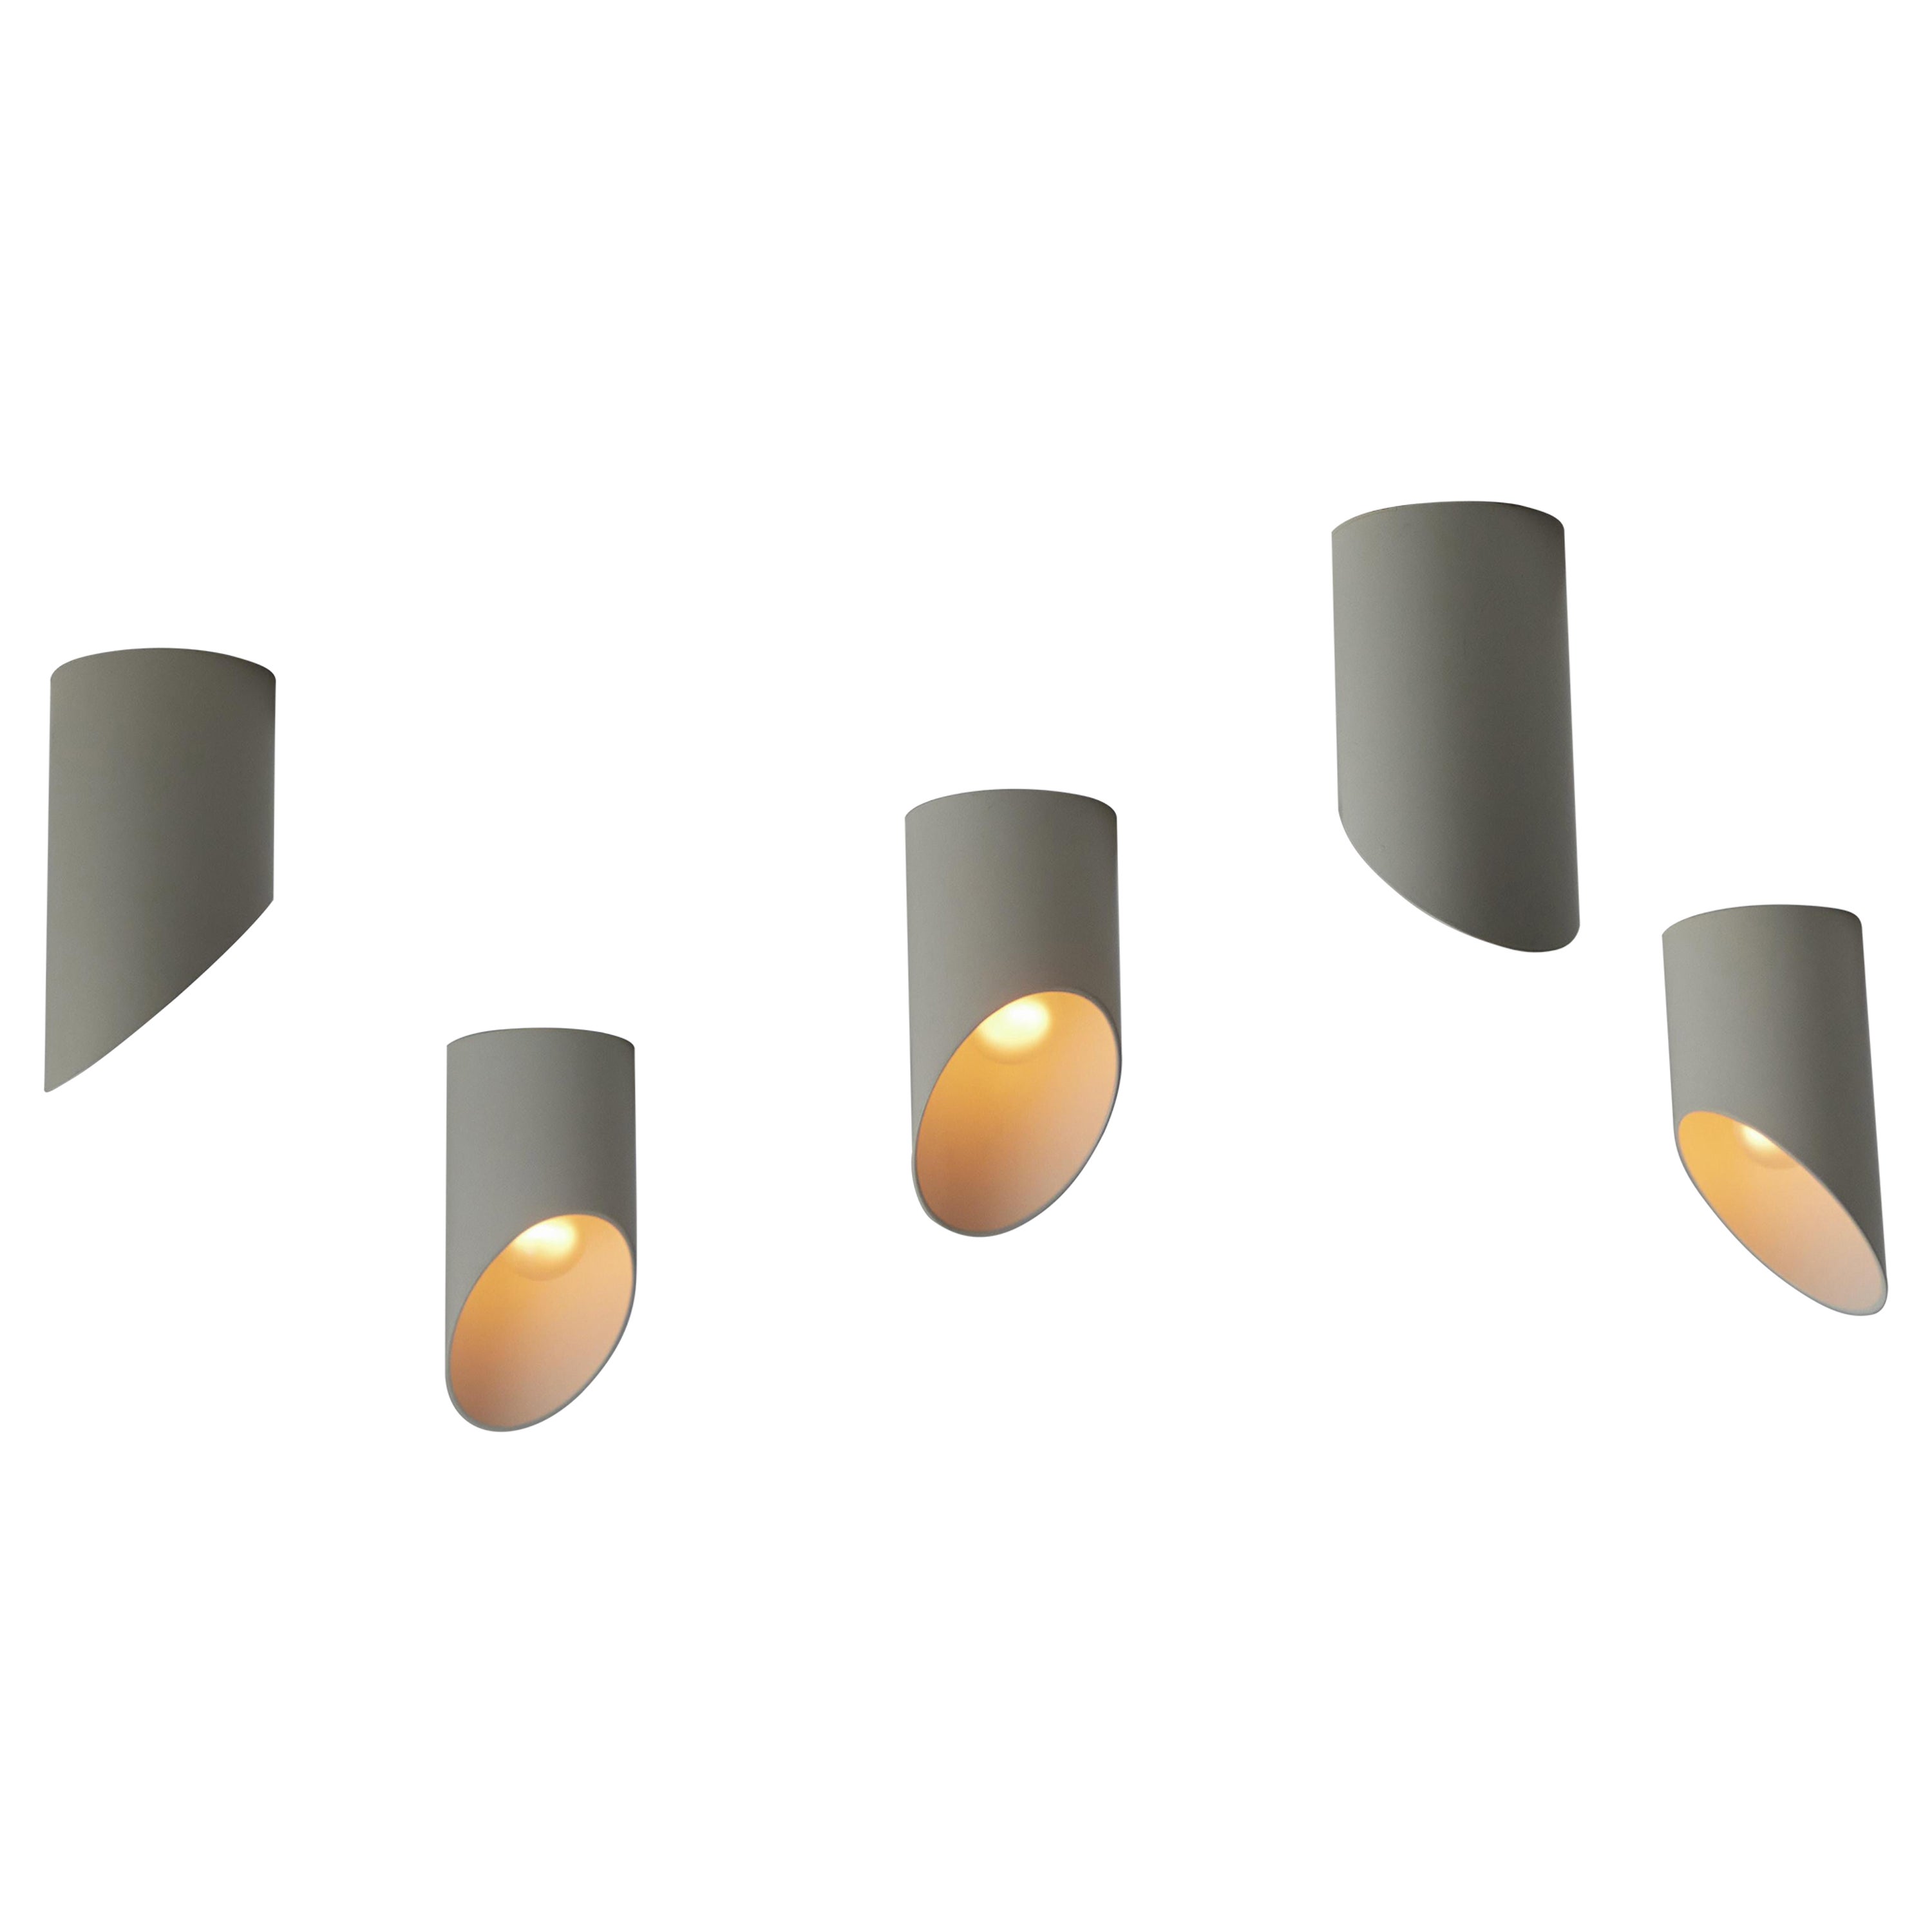 'Obliqua' Ceiling or Wall Lights by Claudio Dini for Bieffeplast  For Sale